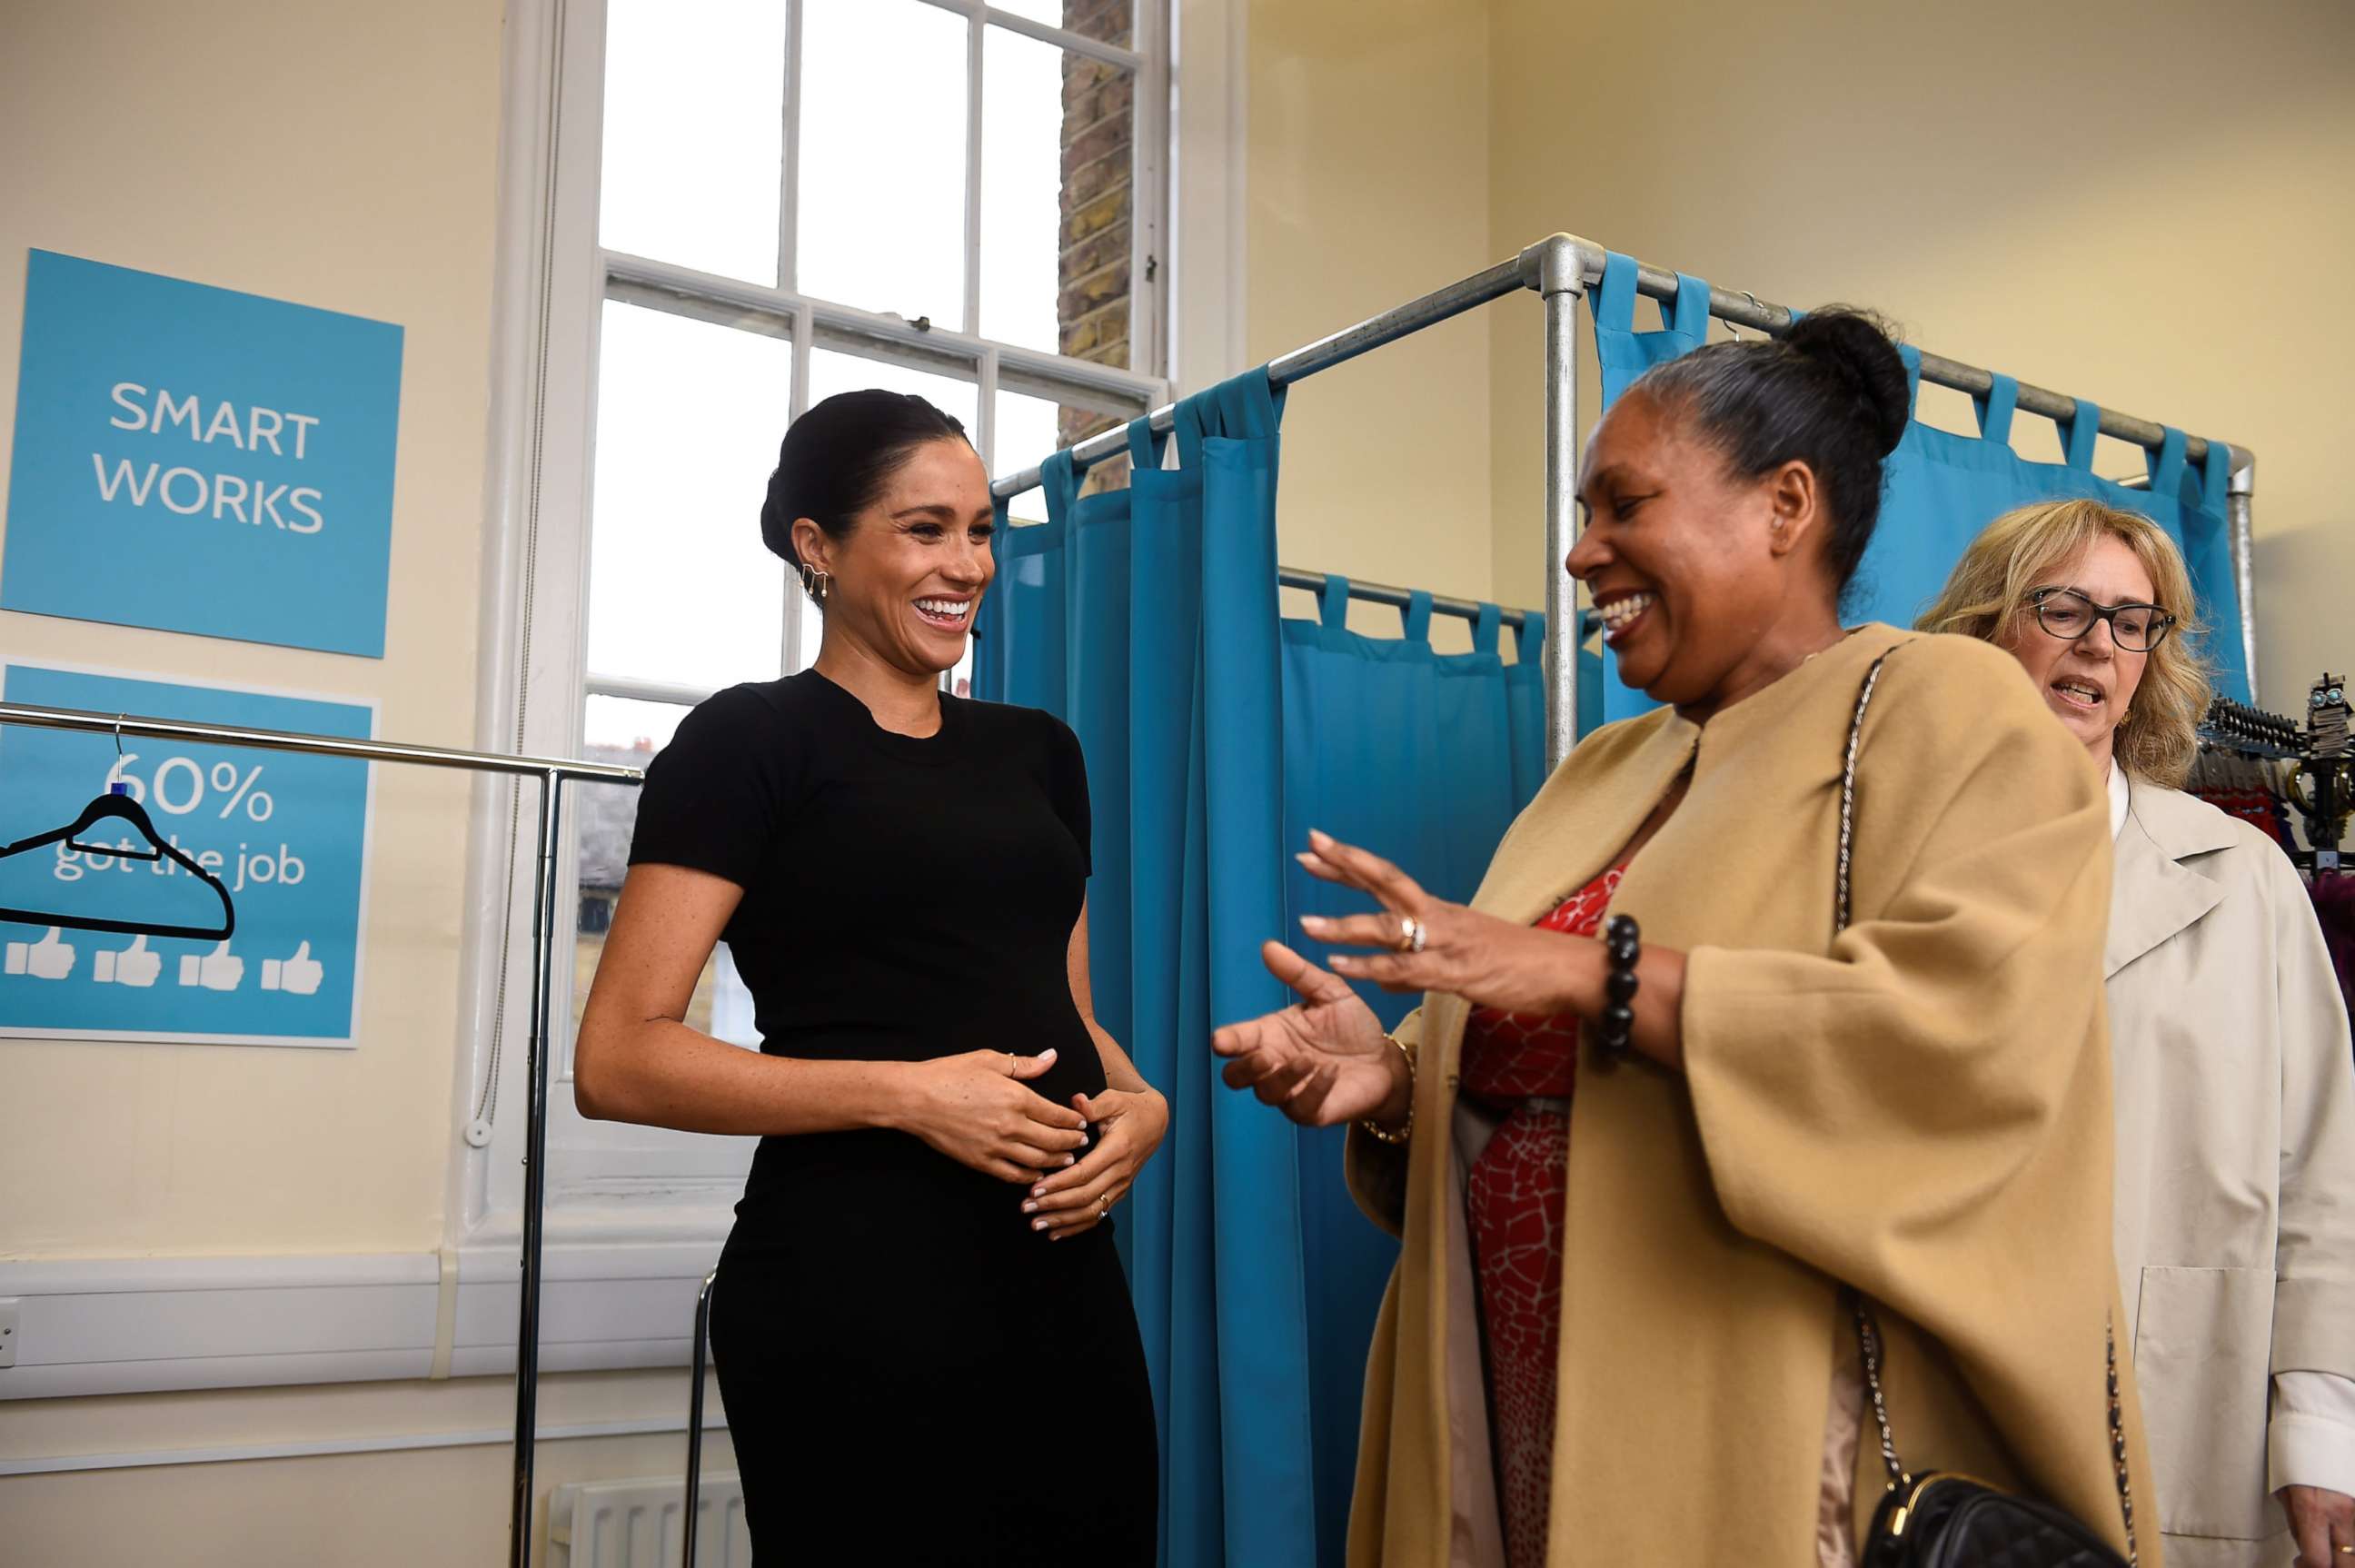 PHOTO: Britain's Meghan, the Duchess of Sussex talks with Patsy Wardally during her visit to Smart Works, a charity to which she has become patron, at St Charles hospital in west London on Jan 10, 2019.